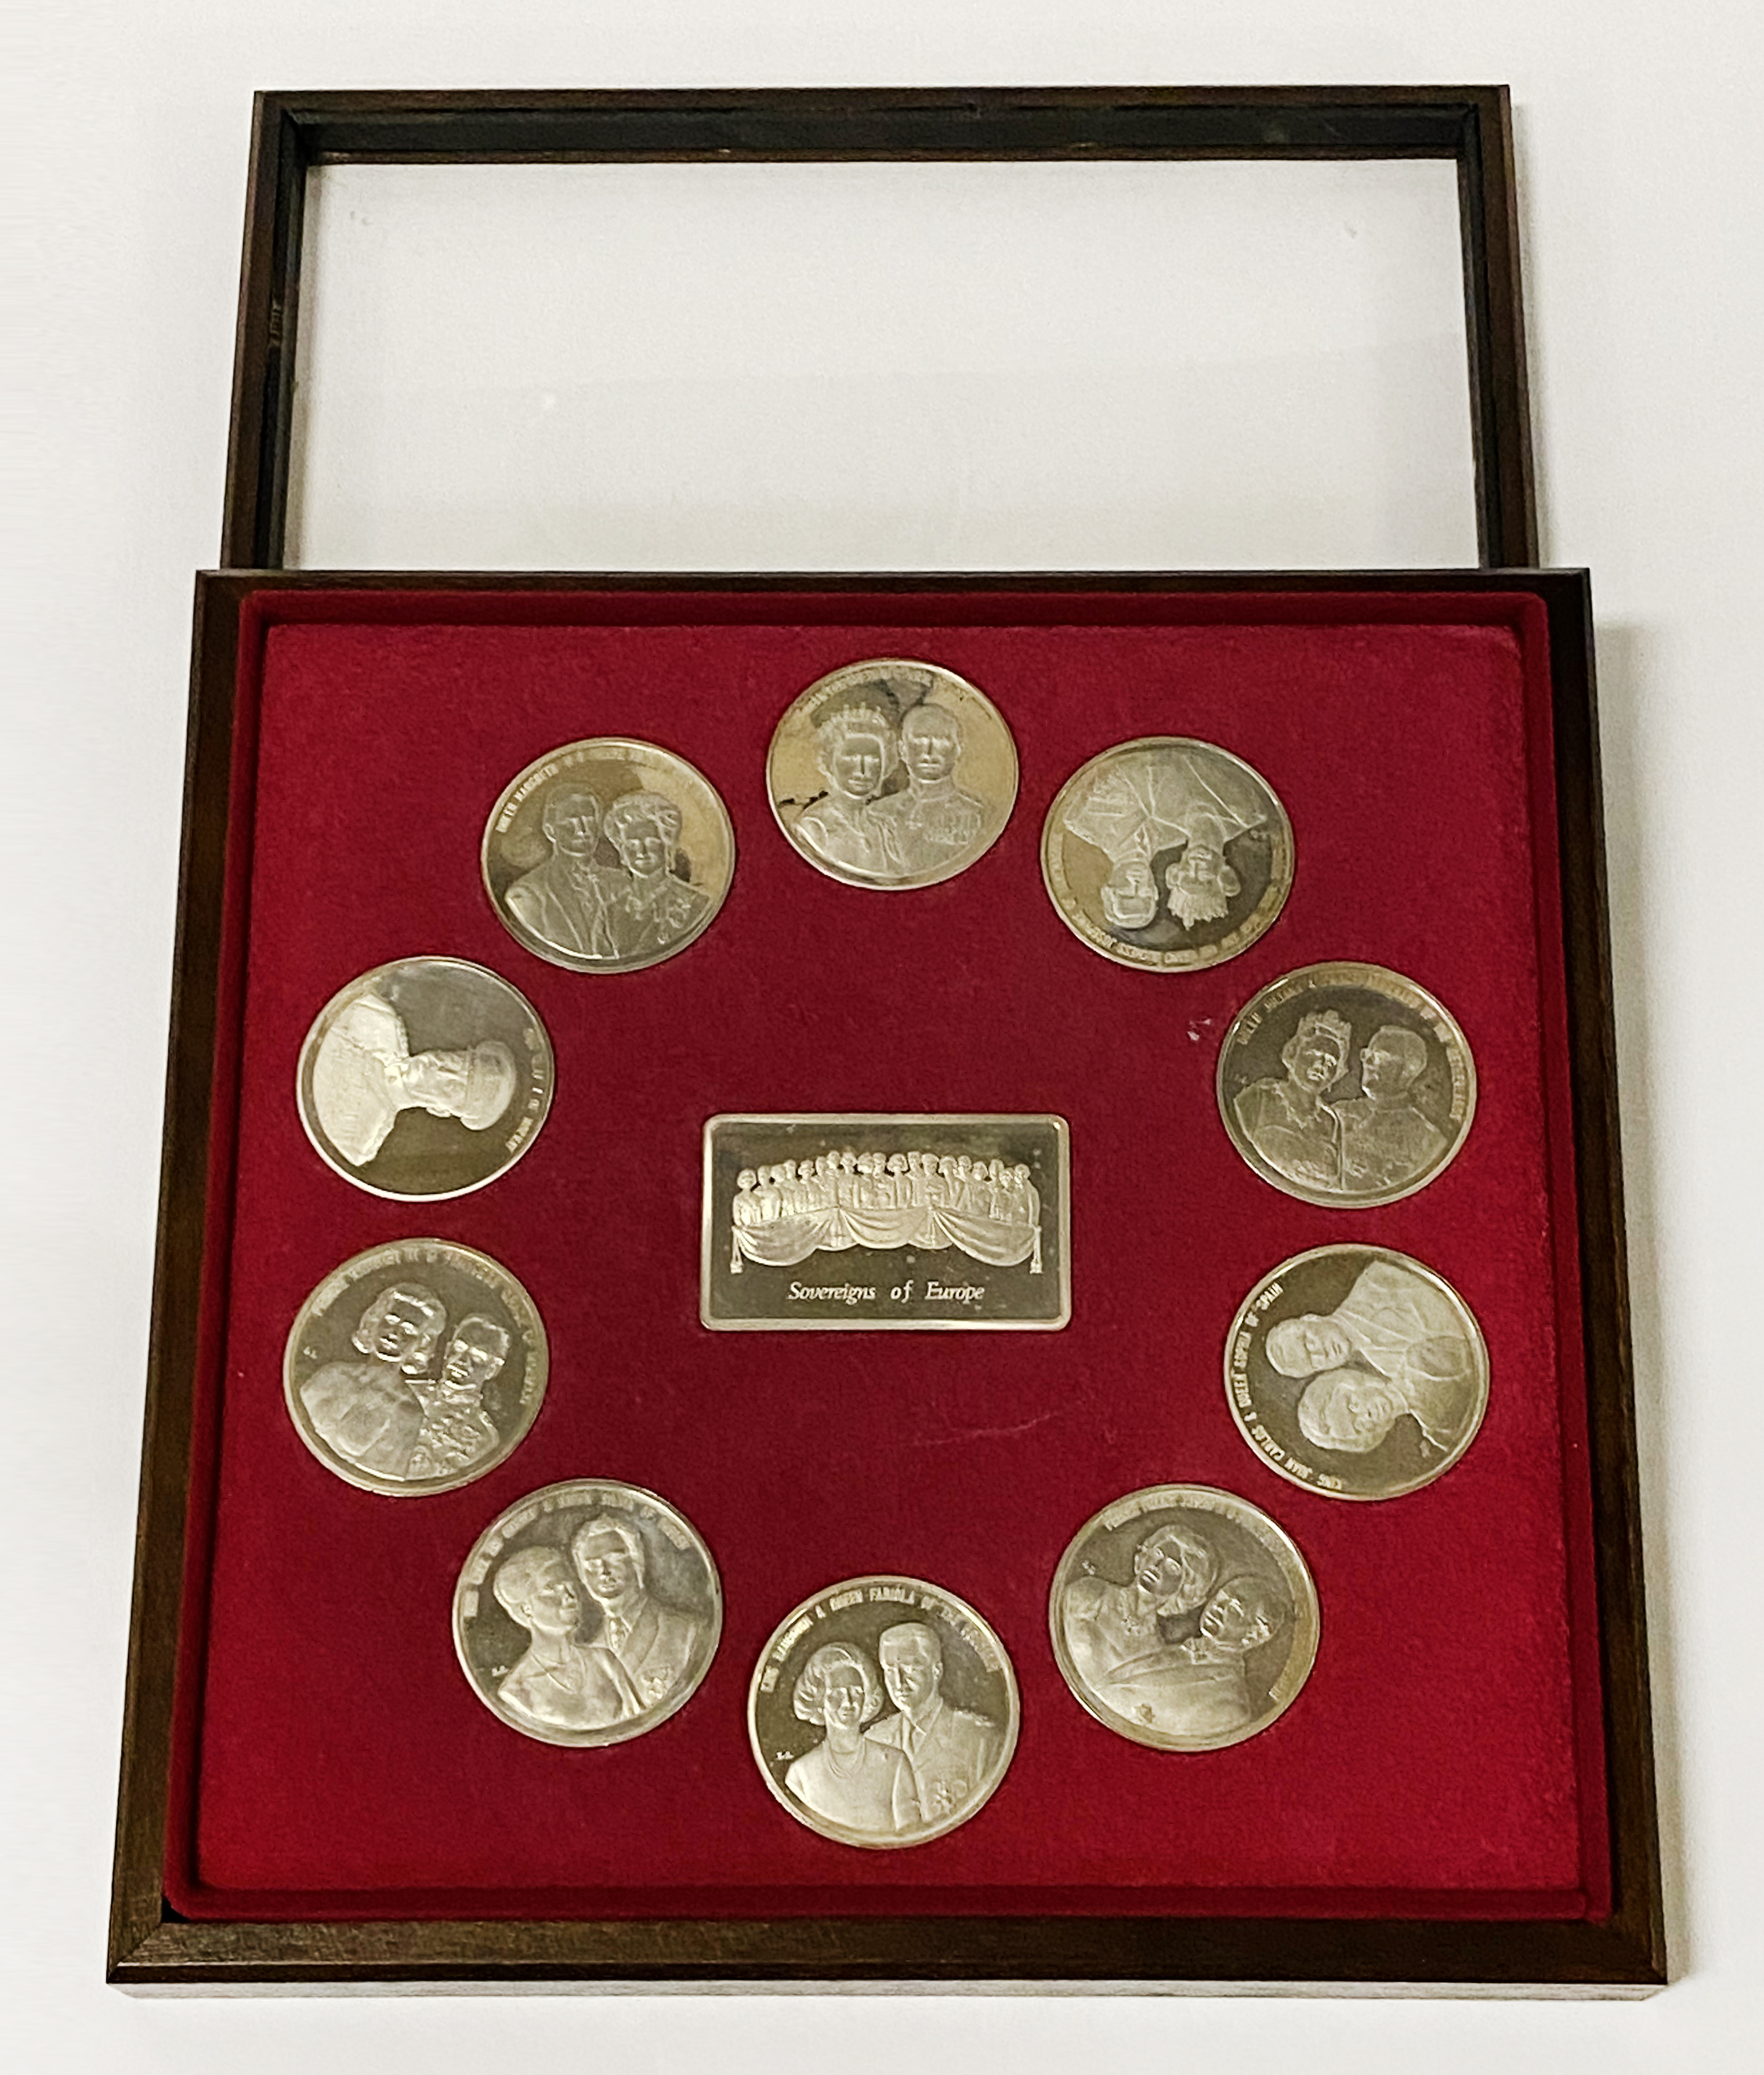 HEAVY (16.8OZS HM SILVER) 10 + 1 MEDALS DEPICTING SOVEREIGNS OF EUROPE 10 ROUND MEDALS - 1.4OZ